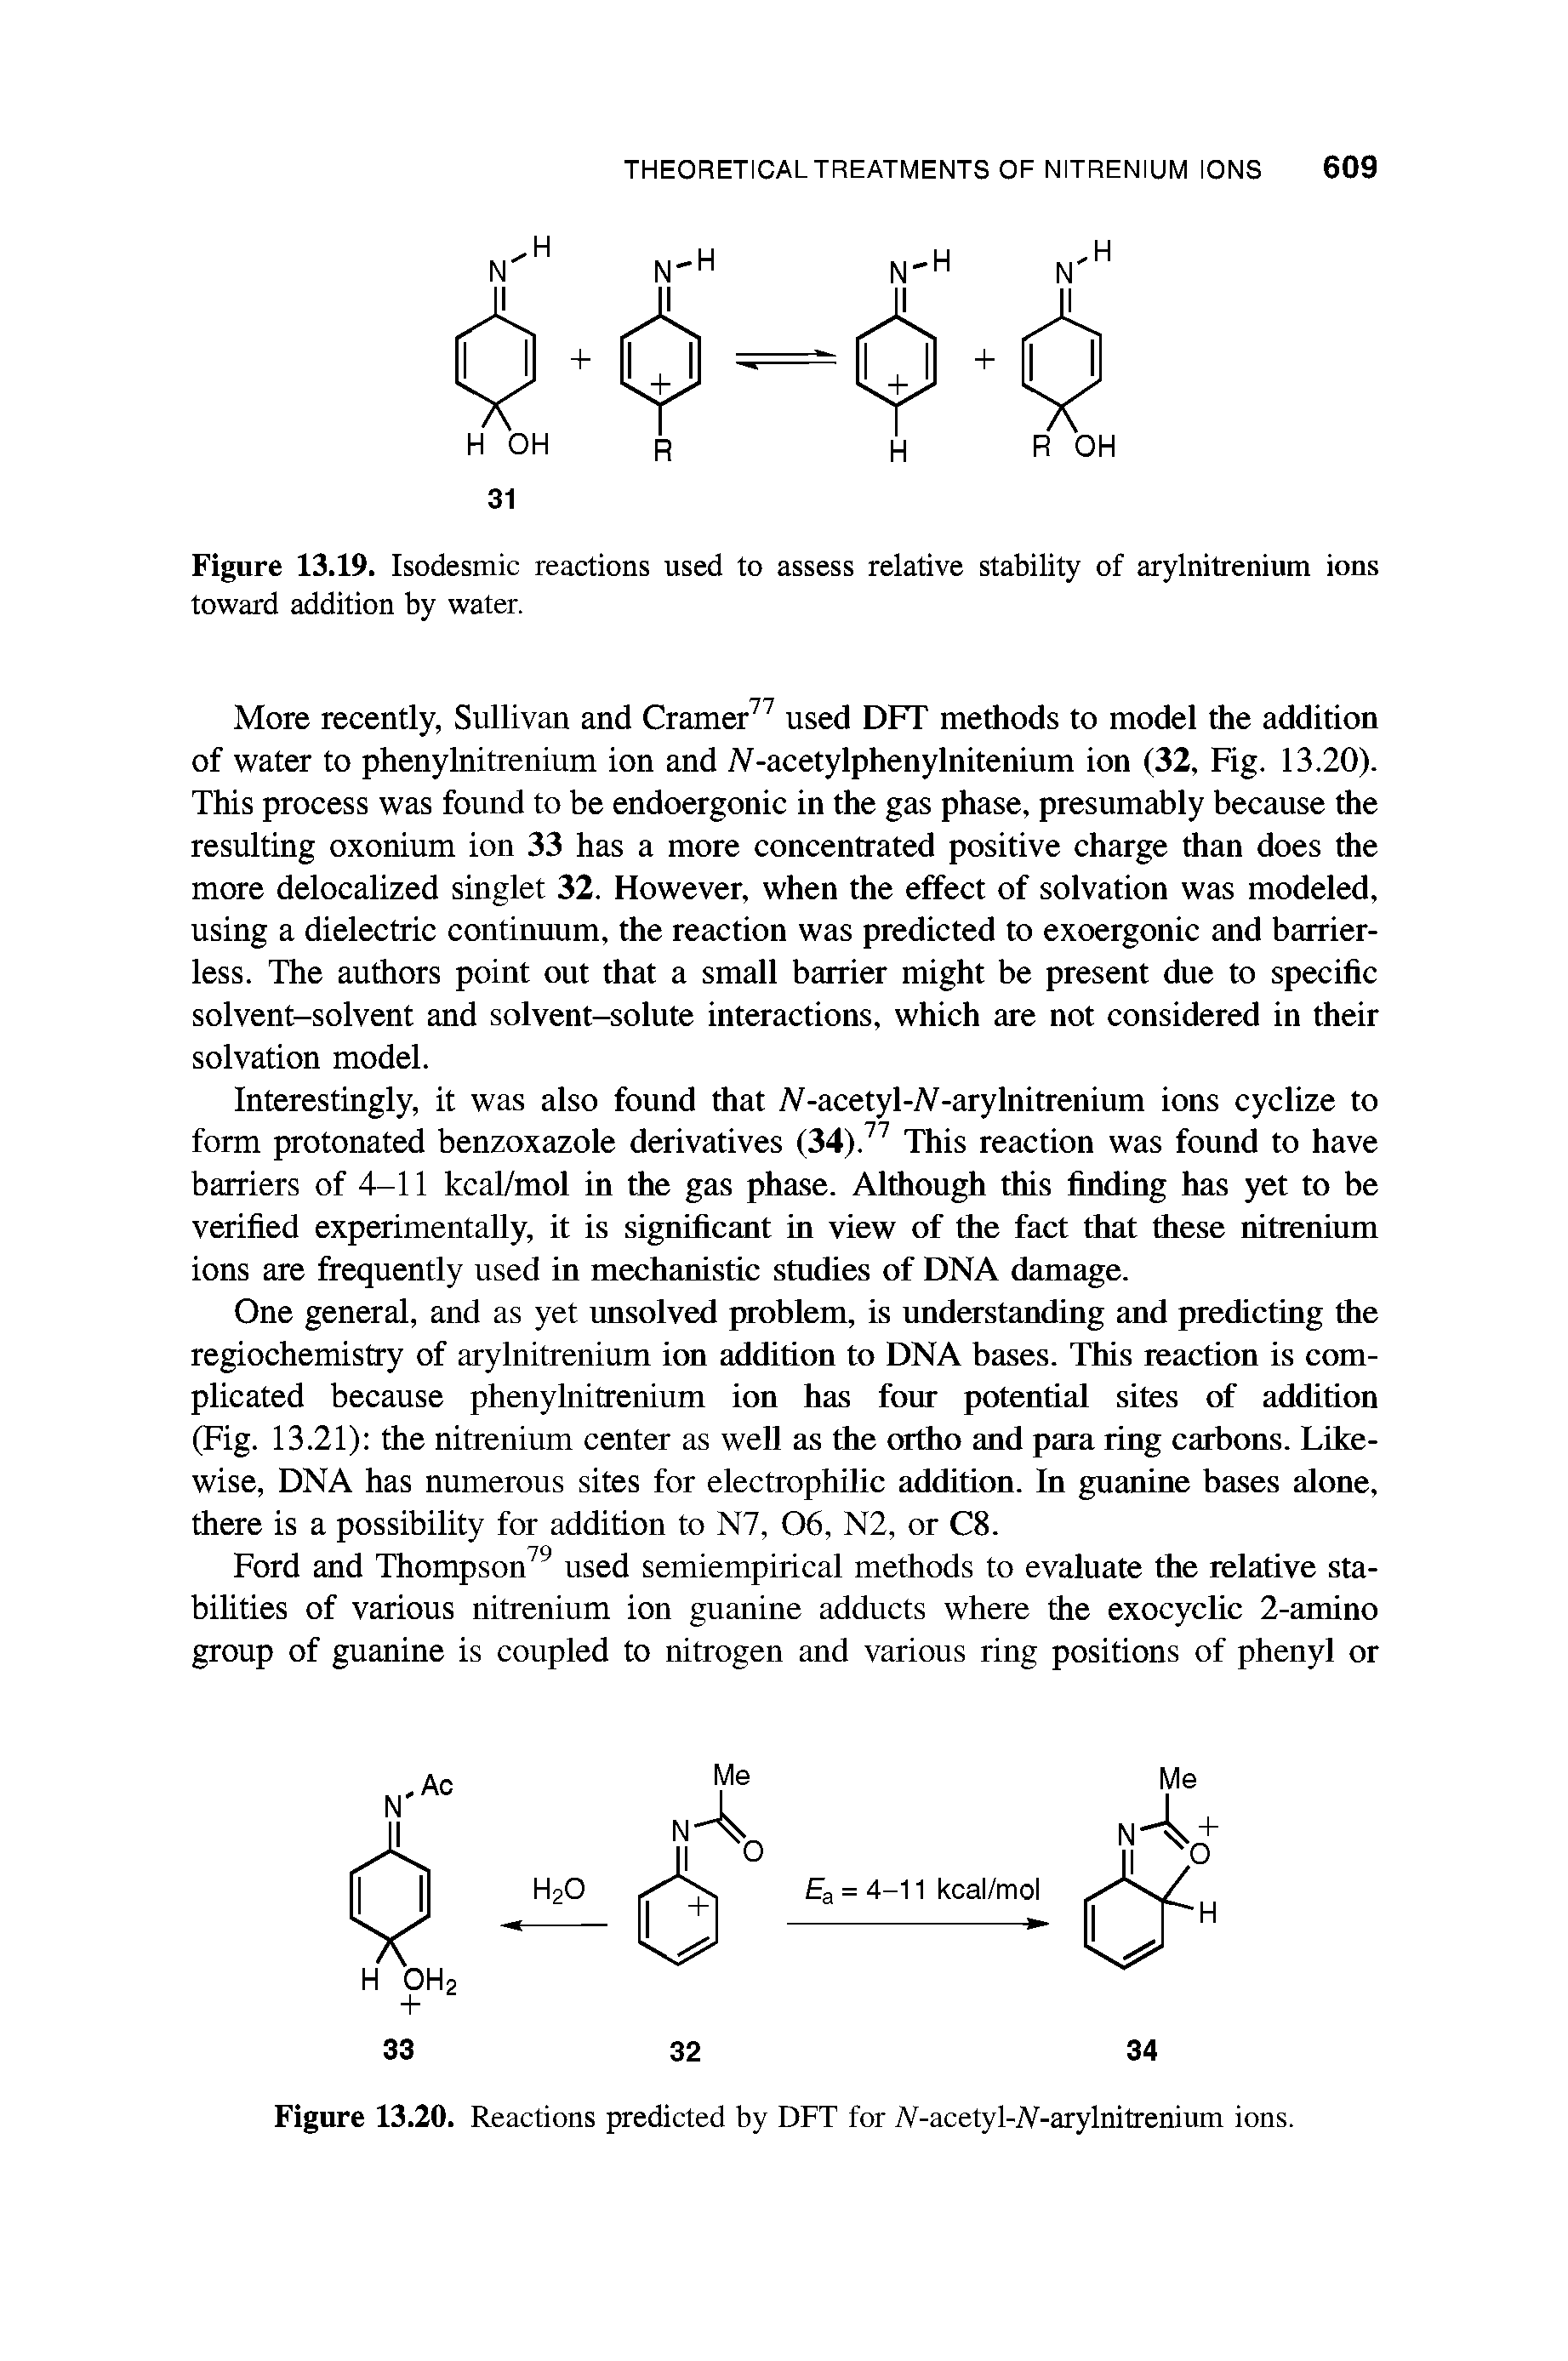 Figure 13.20. Reactions predicted by DFT for N-acetyl-N-arylnitrenium ions.